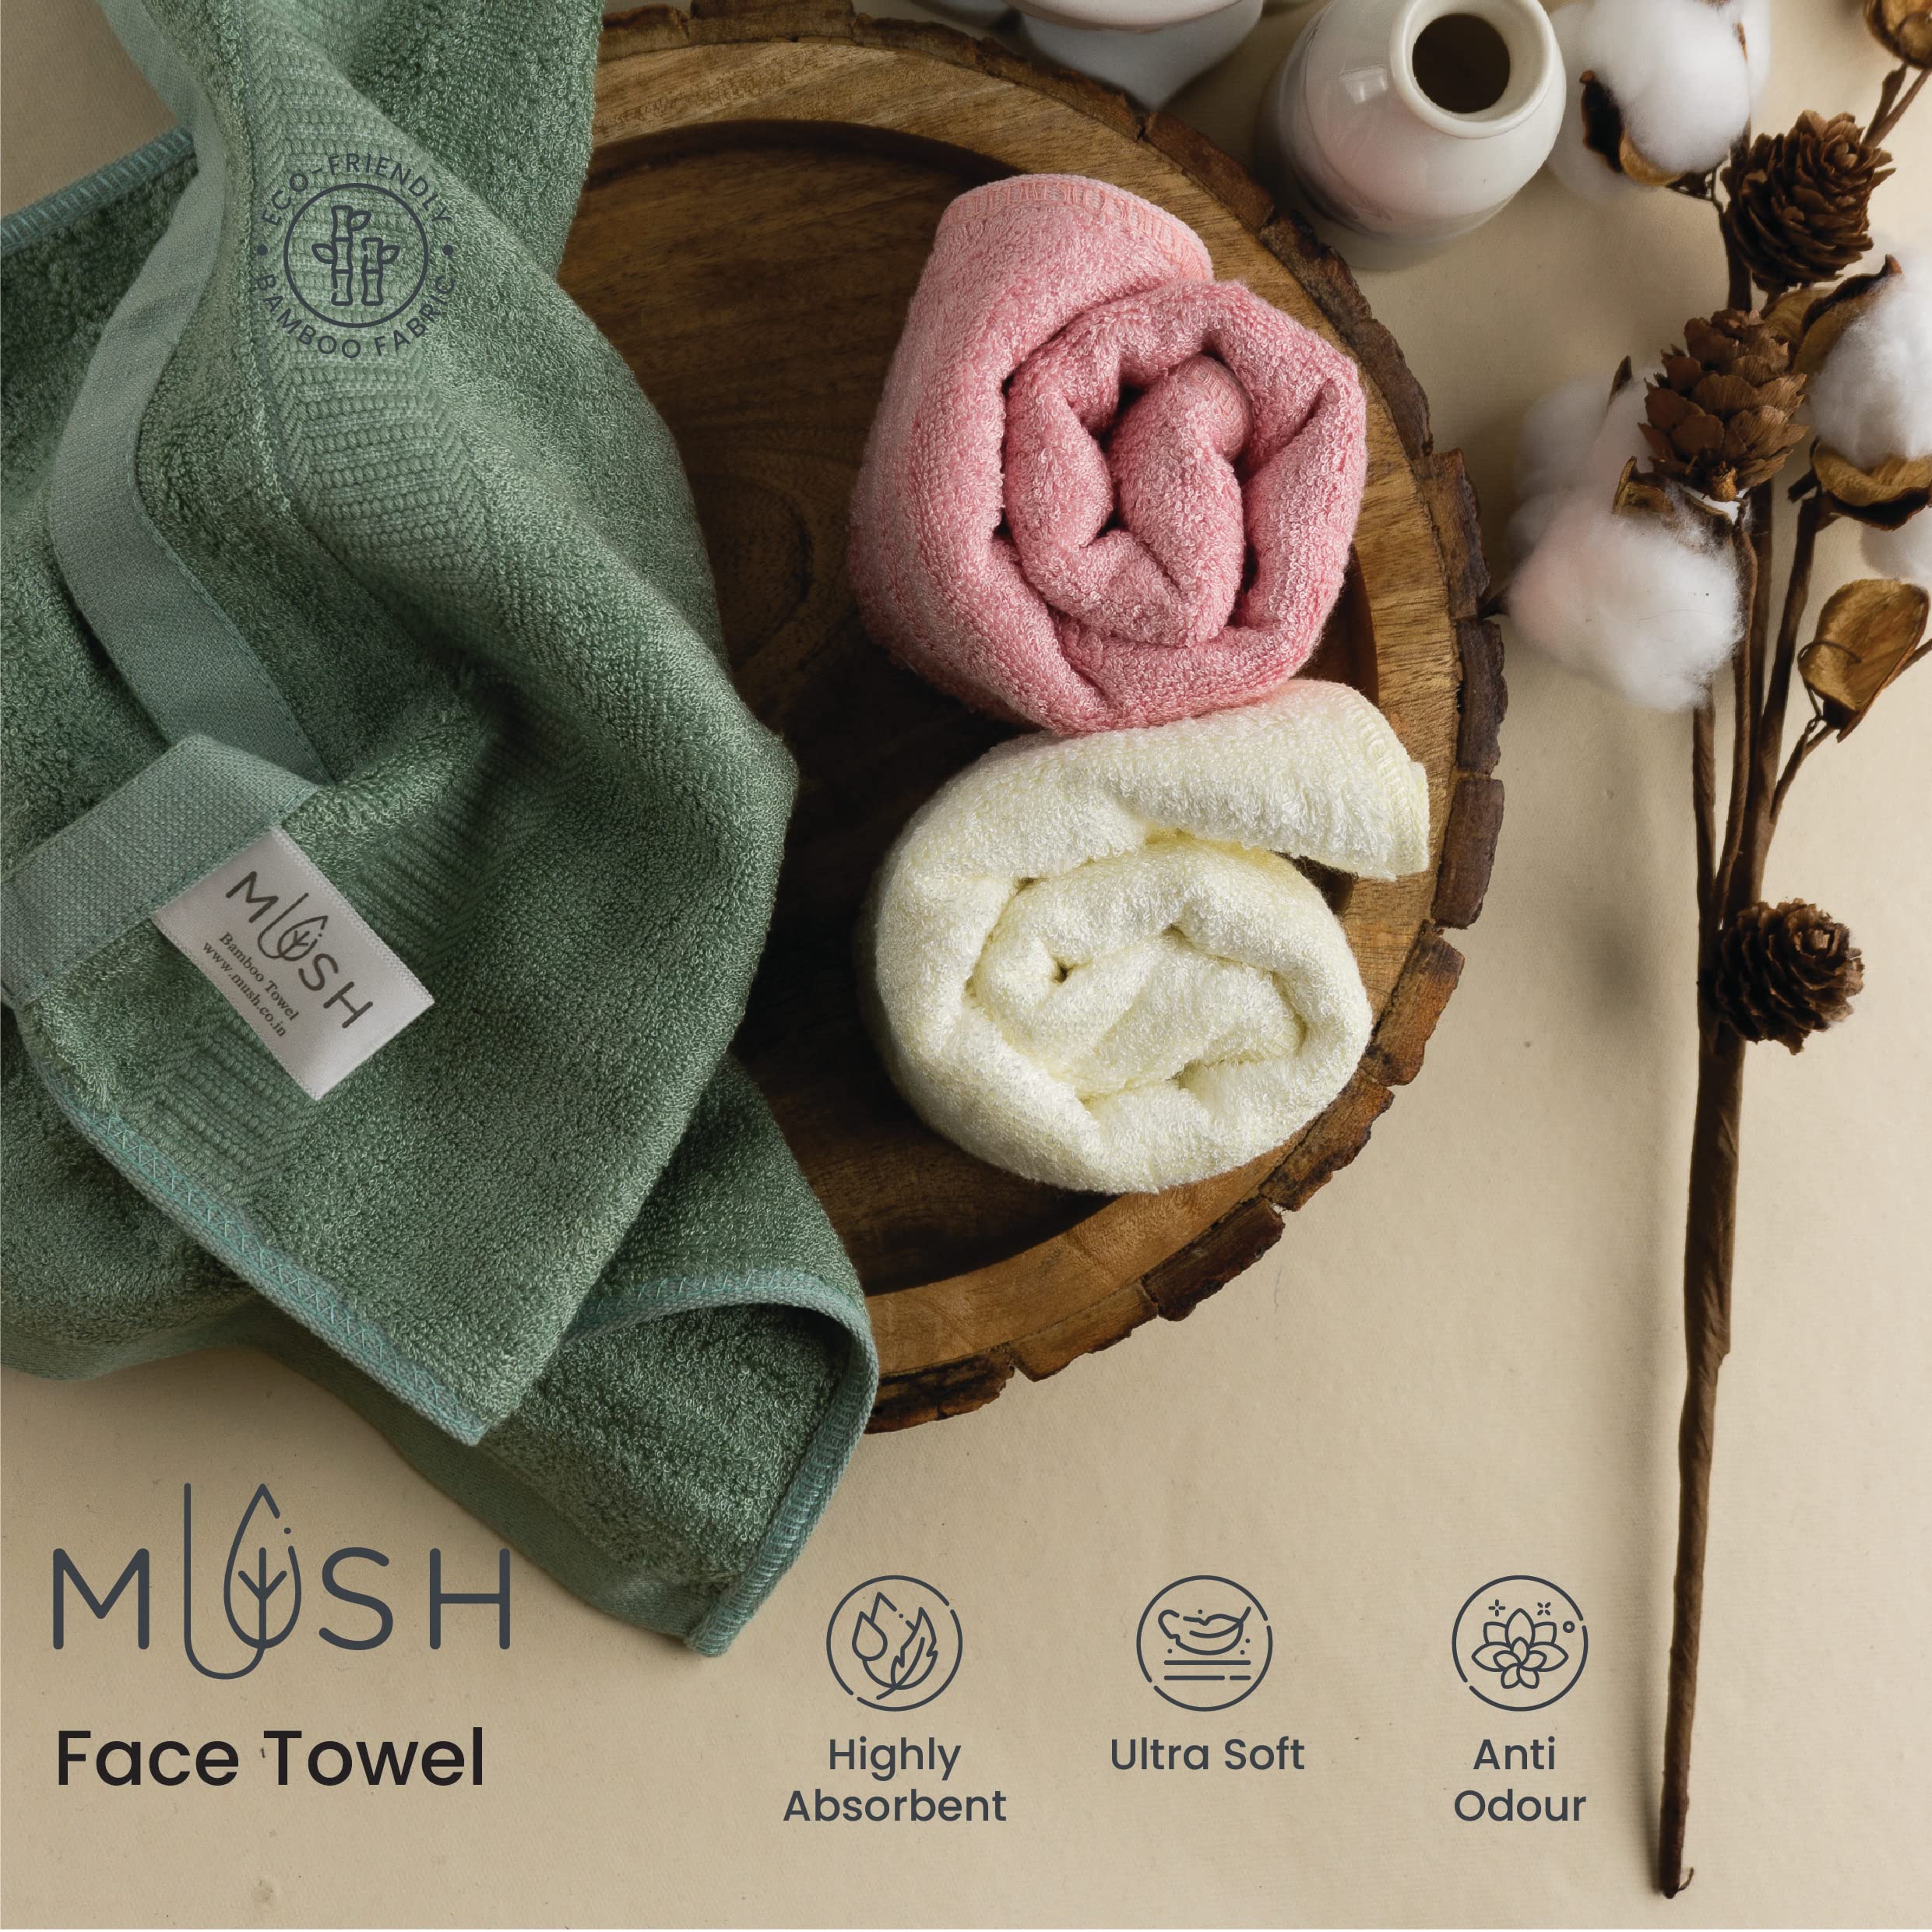 Mush Bamboo Face Towel || 100% Bamboo Face Towel || Ultra Soft, Absorbent, & Quick Dry Towel for Facewash, Gym, Travel, Spa, Beauty Salon || Suitable for Sensitive / Acne Prone Skin || Size: 13 x 13 Inches || 500 GSM Assorted Pack of 5